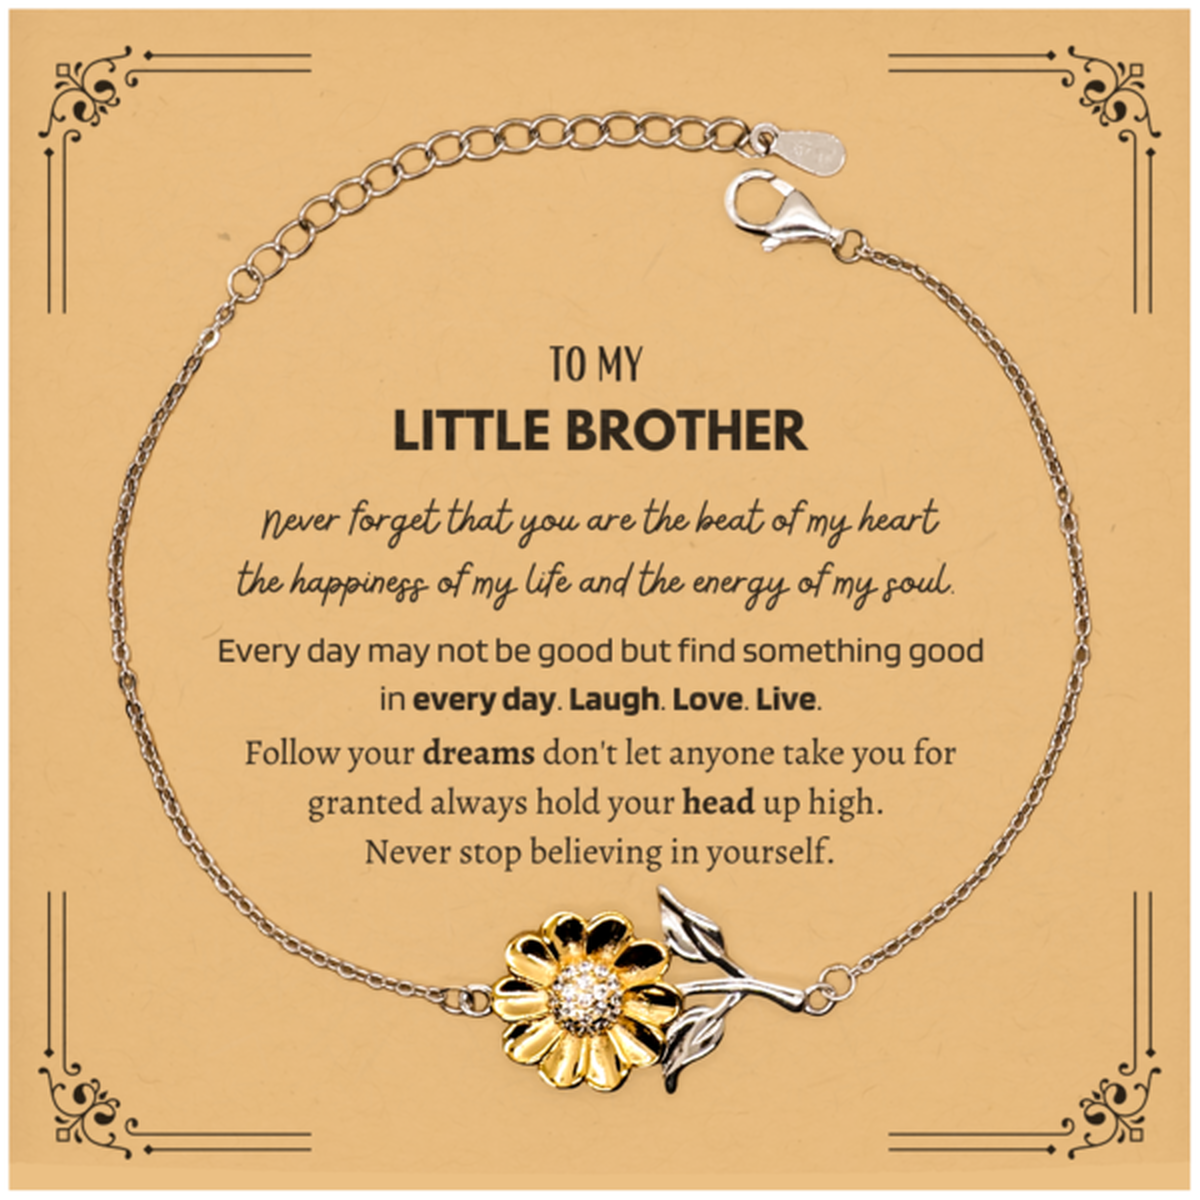 To My Little Brother Message Card Gifts, Christmas Little Brother Sunflower Bracelet Present, Birthday Unique Motivational For Little Brother, To My Little Brother Never forget that you are the beat of my heart the happiness of my life and the energy of m